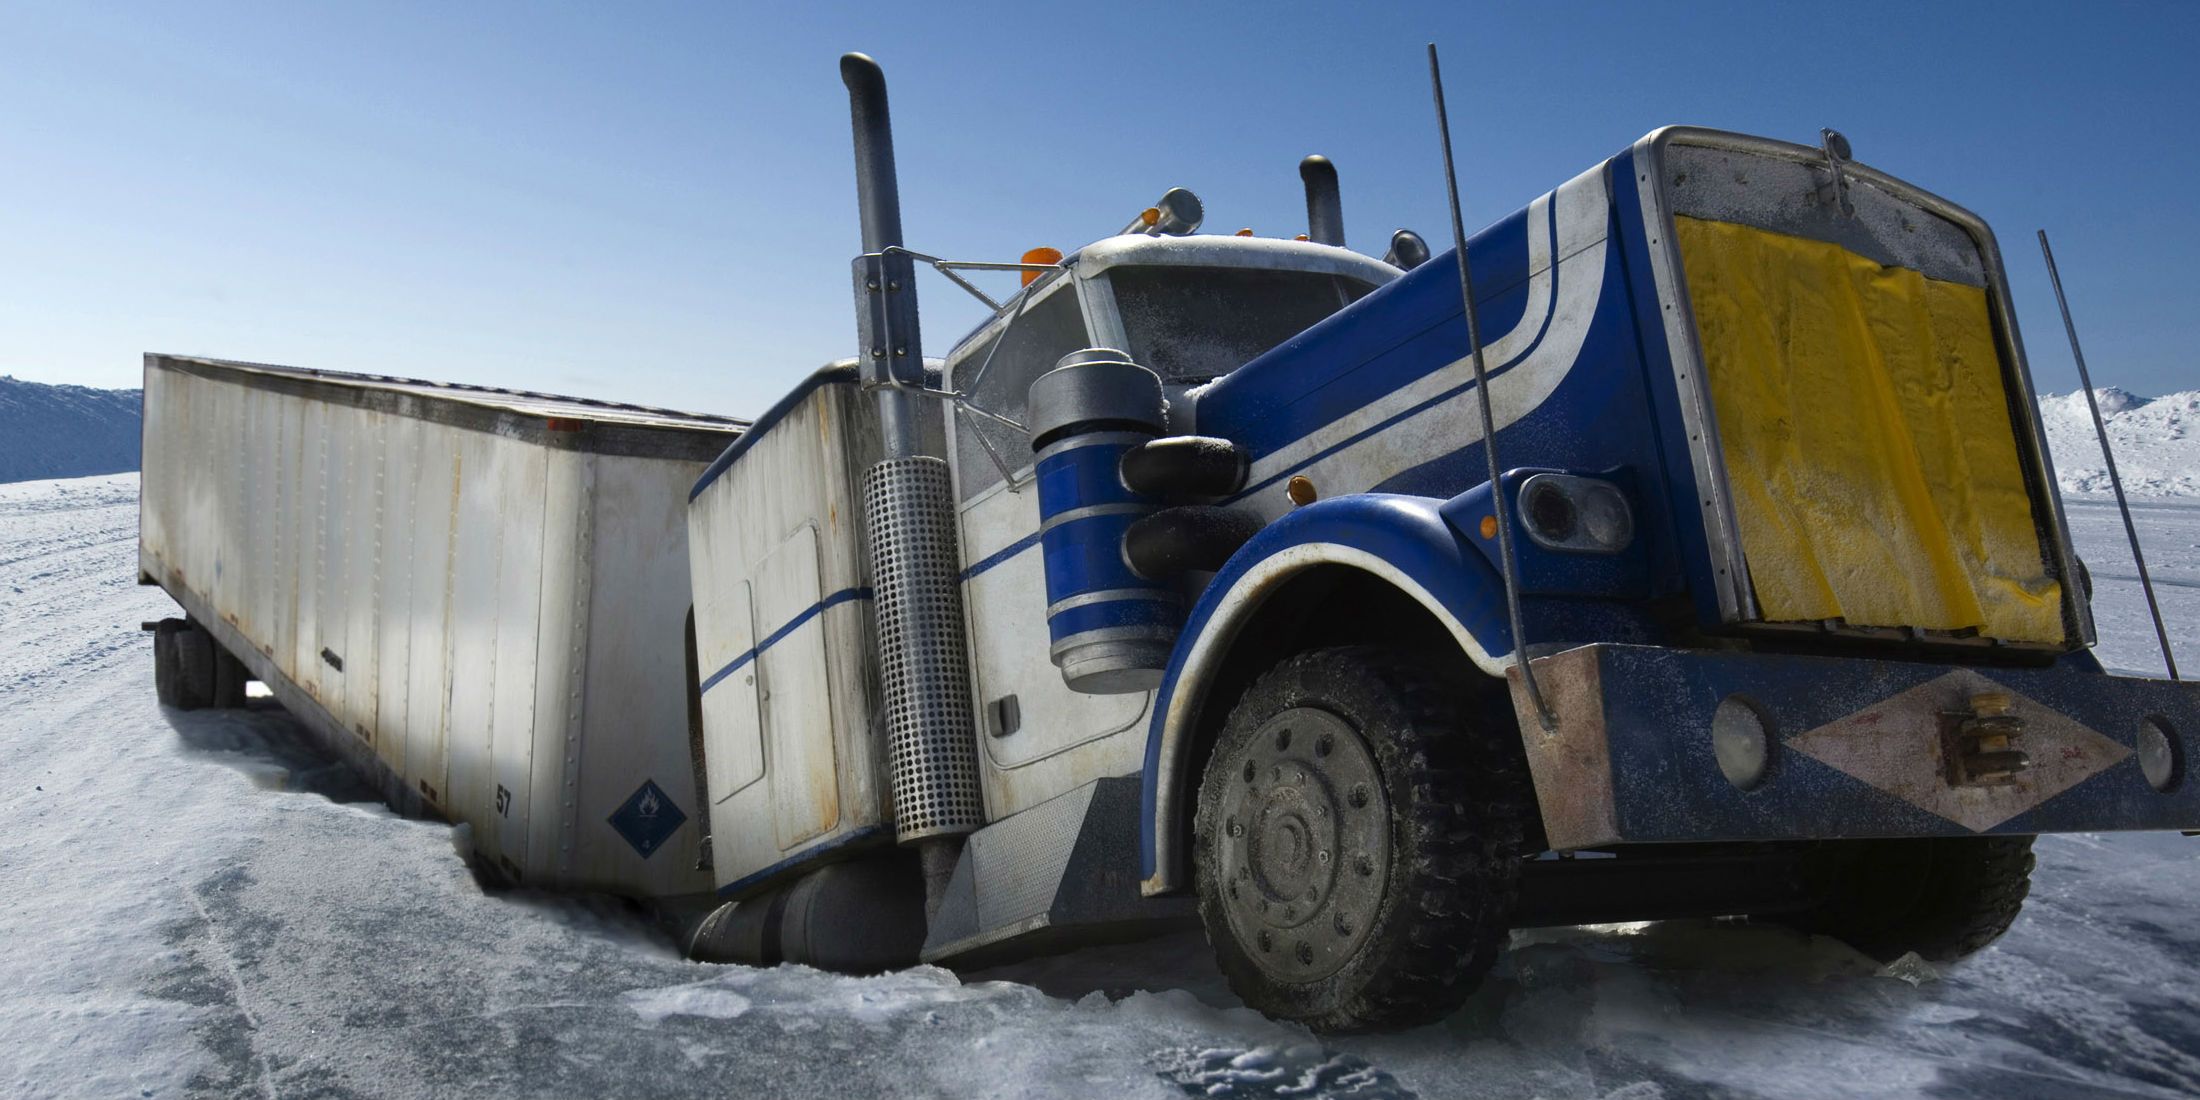 The ice road truckers battle across the continent over frozen lakes, rivers...